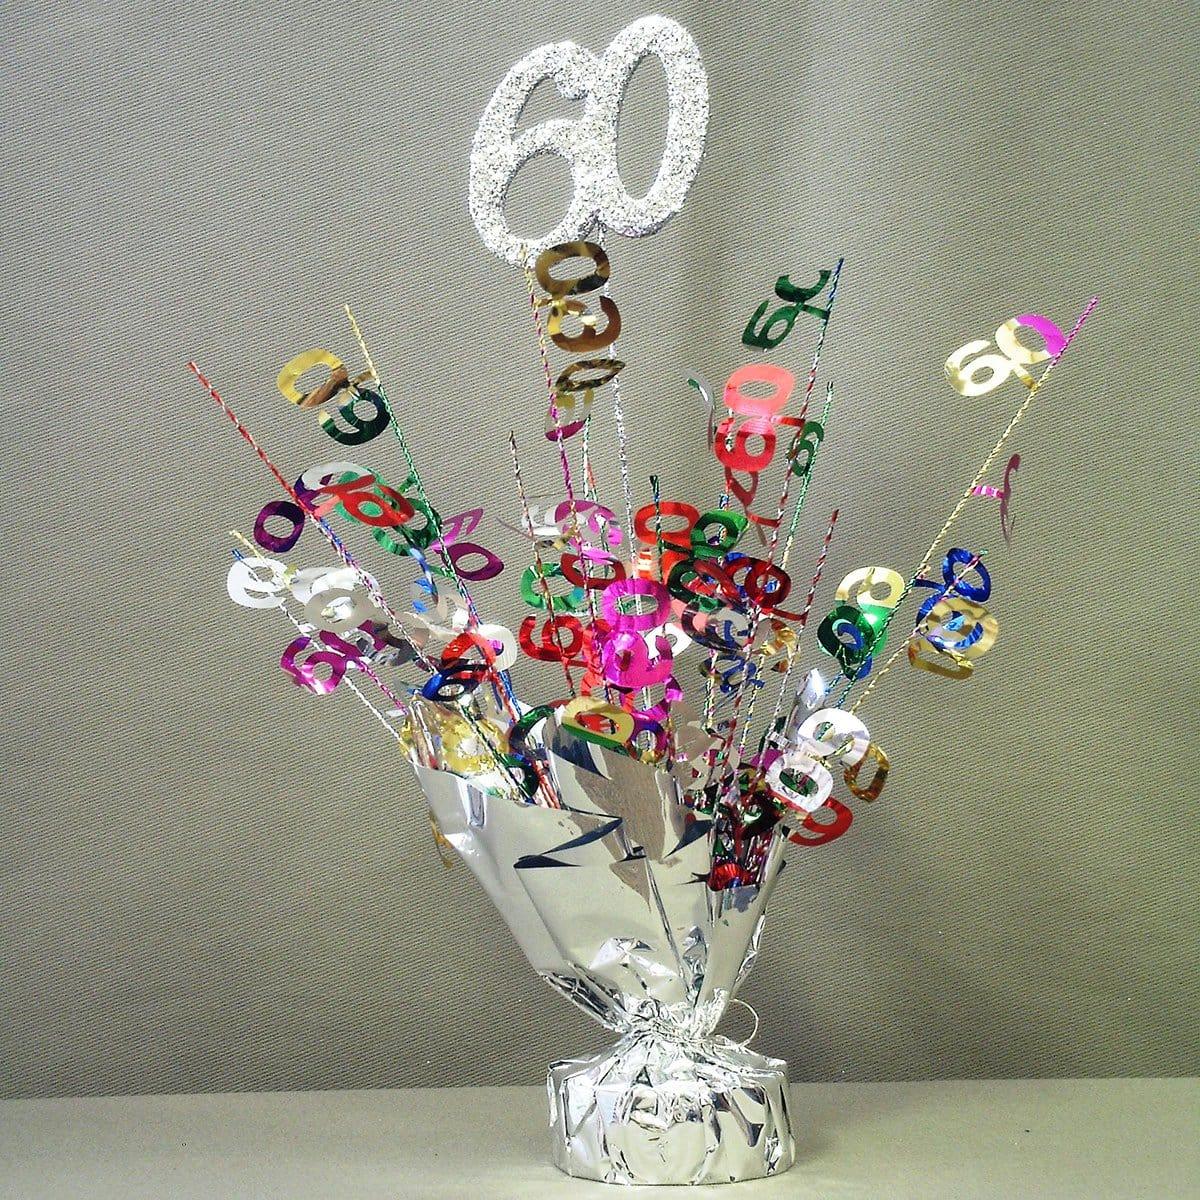 Buy Balloons #60 Silver Balloon Weight / Centerpiece sold at Party Expert